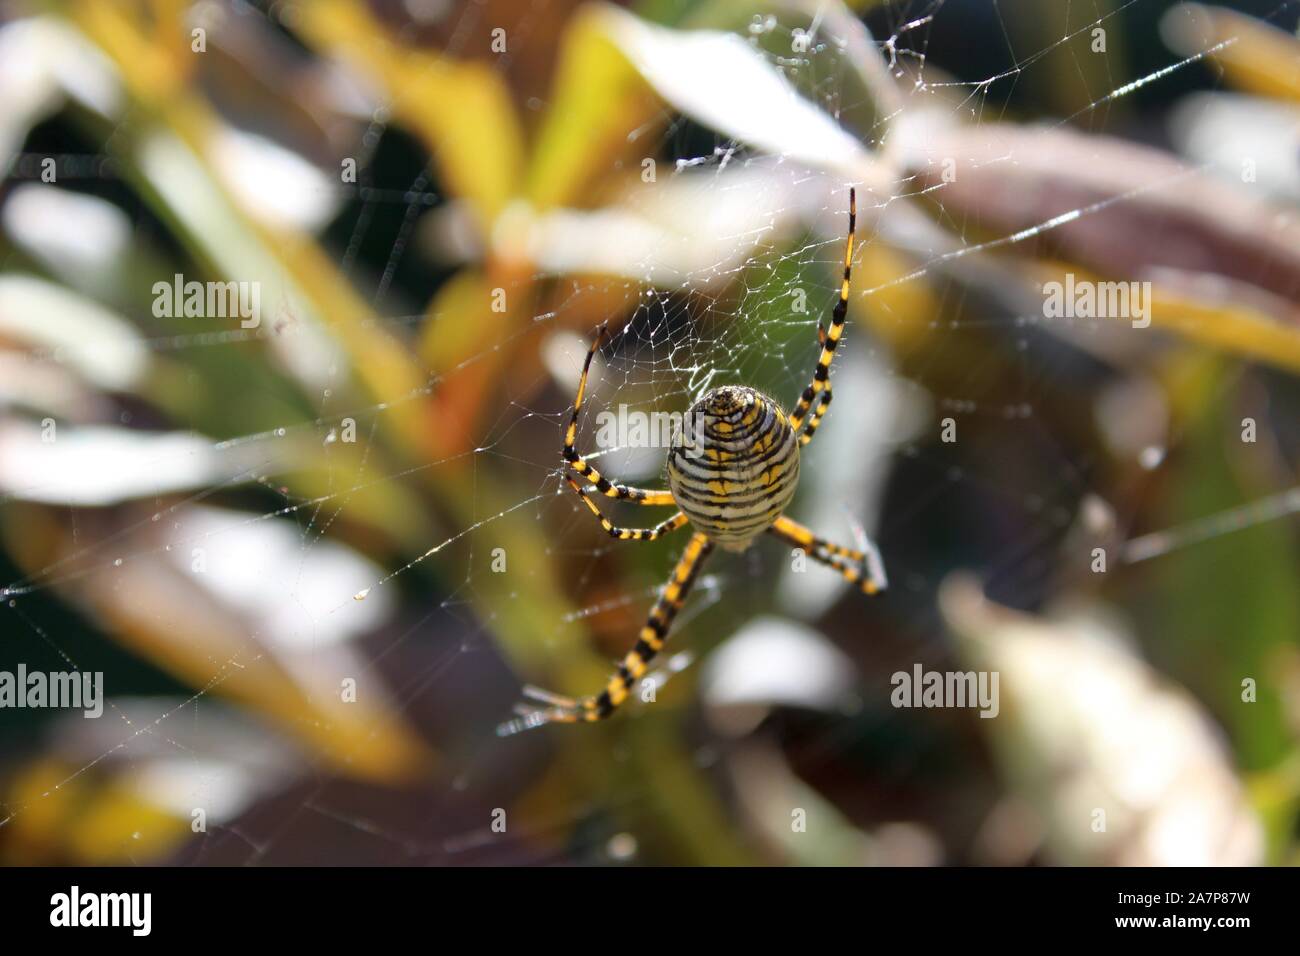 A Banded Garden Spider Sitting On It's Web Stock Photo